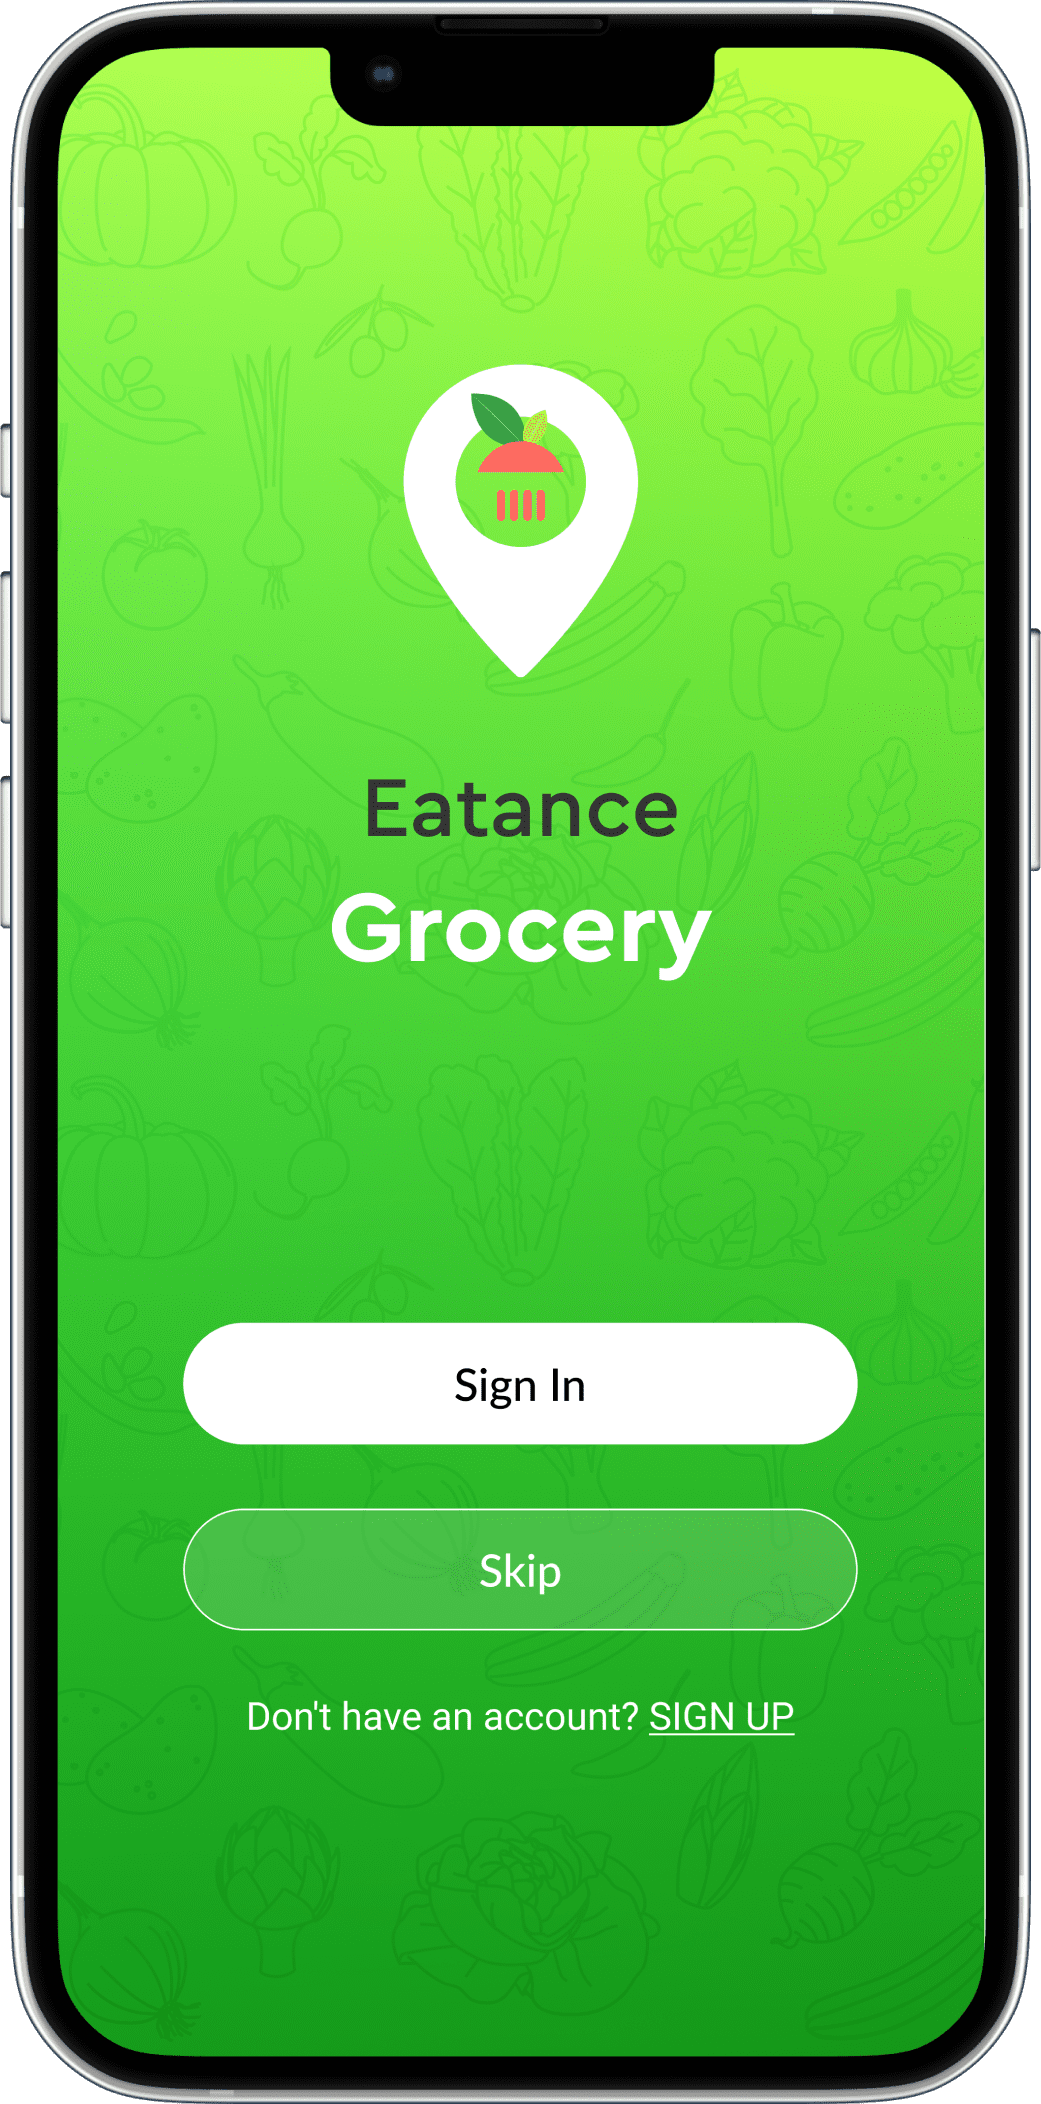 online grocery delivery app sign in screen